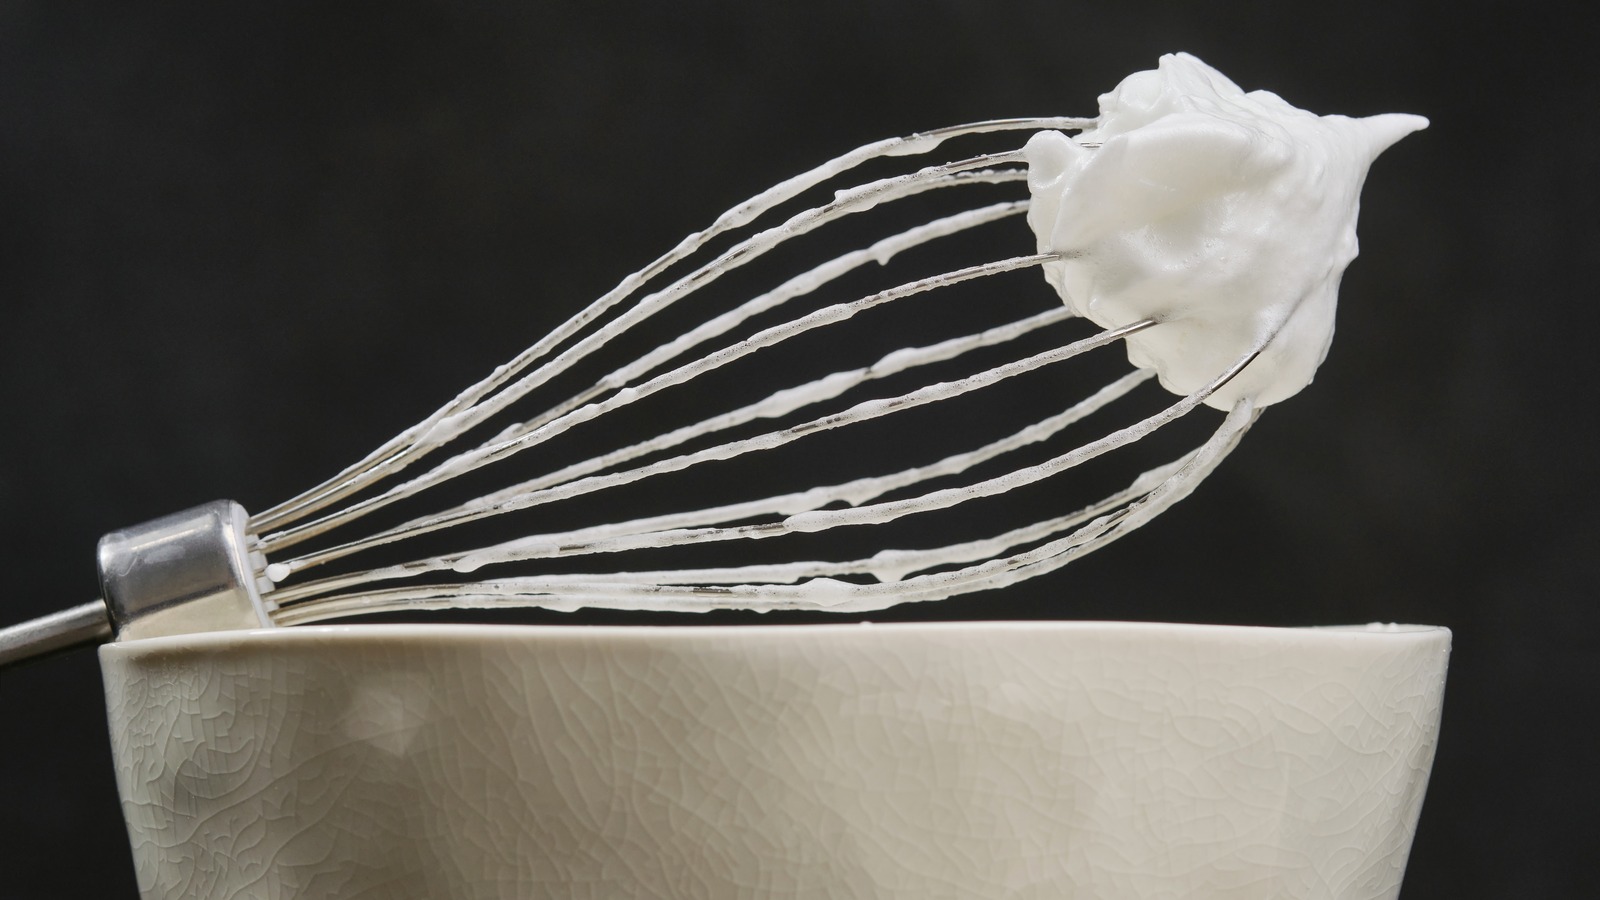 https://www.tastingtable.com/img/gallery/why-the-flat-whisk-will-be-your-new-favorite-kitchen-tool/l-intro-1655905227.jpg